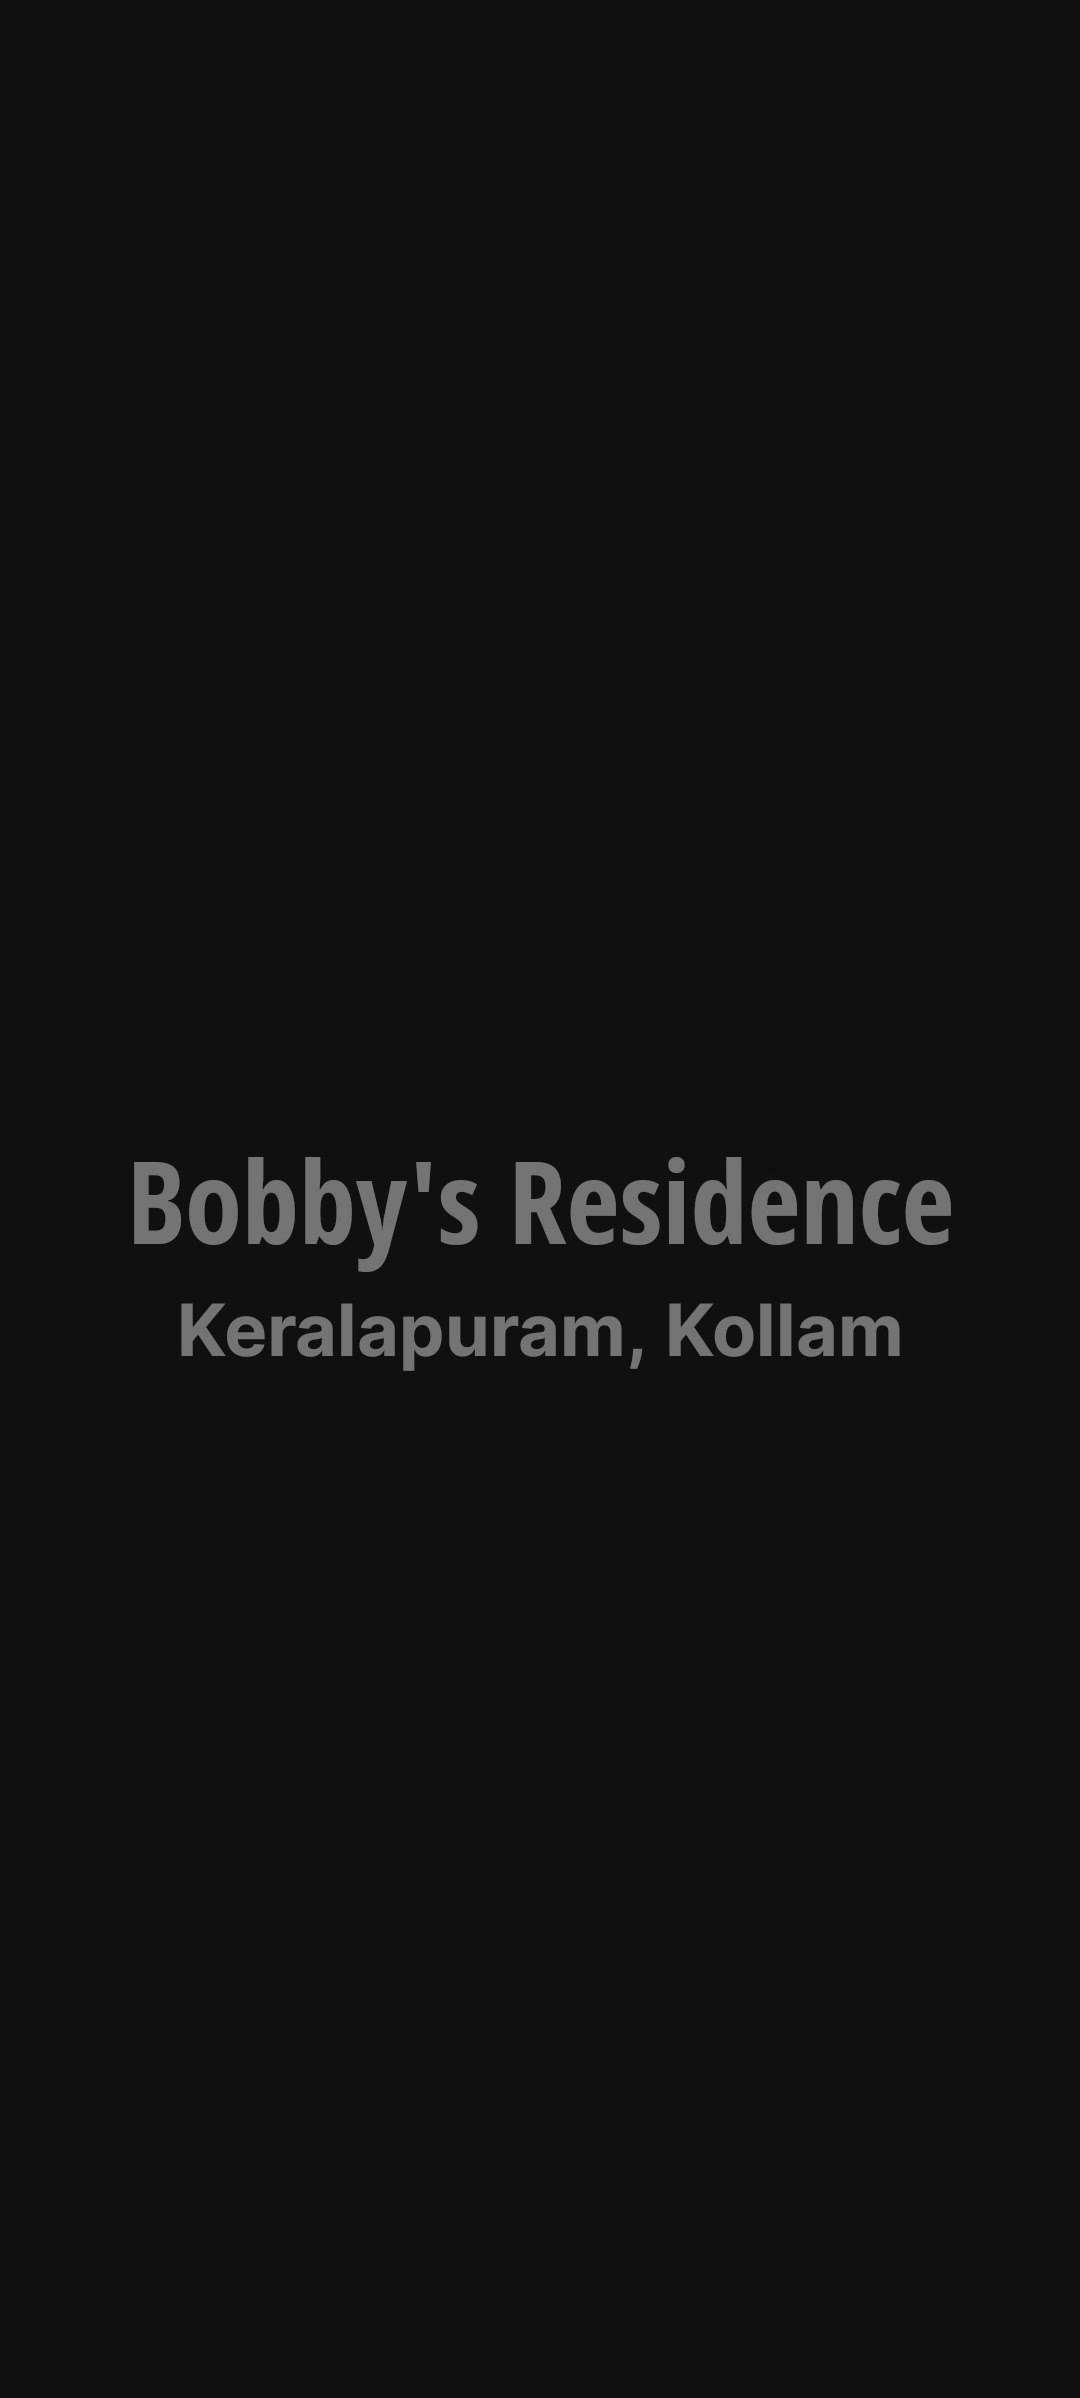 Bobby's Abode
Project Type: Residential ( Interior Renovation)
Client: Dr. Bobby
Location: Keralapuram
Area: 3500 sq. ft
.
.
Bathroom Desig for the project, located in Keralapuram, Kollam. The residence interior has been re-designed to induce a distinctive, fresh living space that suits the owners’ fondness and personalities better. Bobby's abode has been revamped, utilizing white and heavy black-green tones; a color palette that is suitable for both adults and children. In addition, most furniture existing in the residence has been re-used, assuring the existing design principles in the abode through re-designing it. The blend between the arches and common design forms, along with the dynamic colors, complete an adorable, amusing, and cozy interior environment.
.
.

#furnitures #wood #table #couch #woodworking #furnituredesign #woodwork #onthetable #tabledecor #woodart #BathroomIdeas #toilet #salt #saltdesigns #BathroomStorage